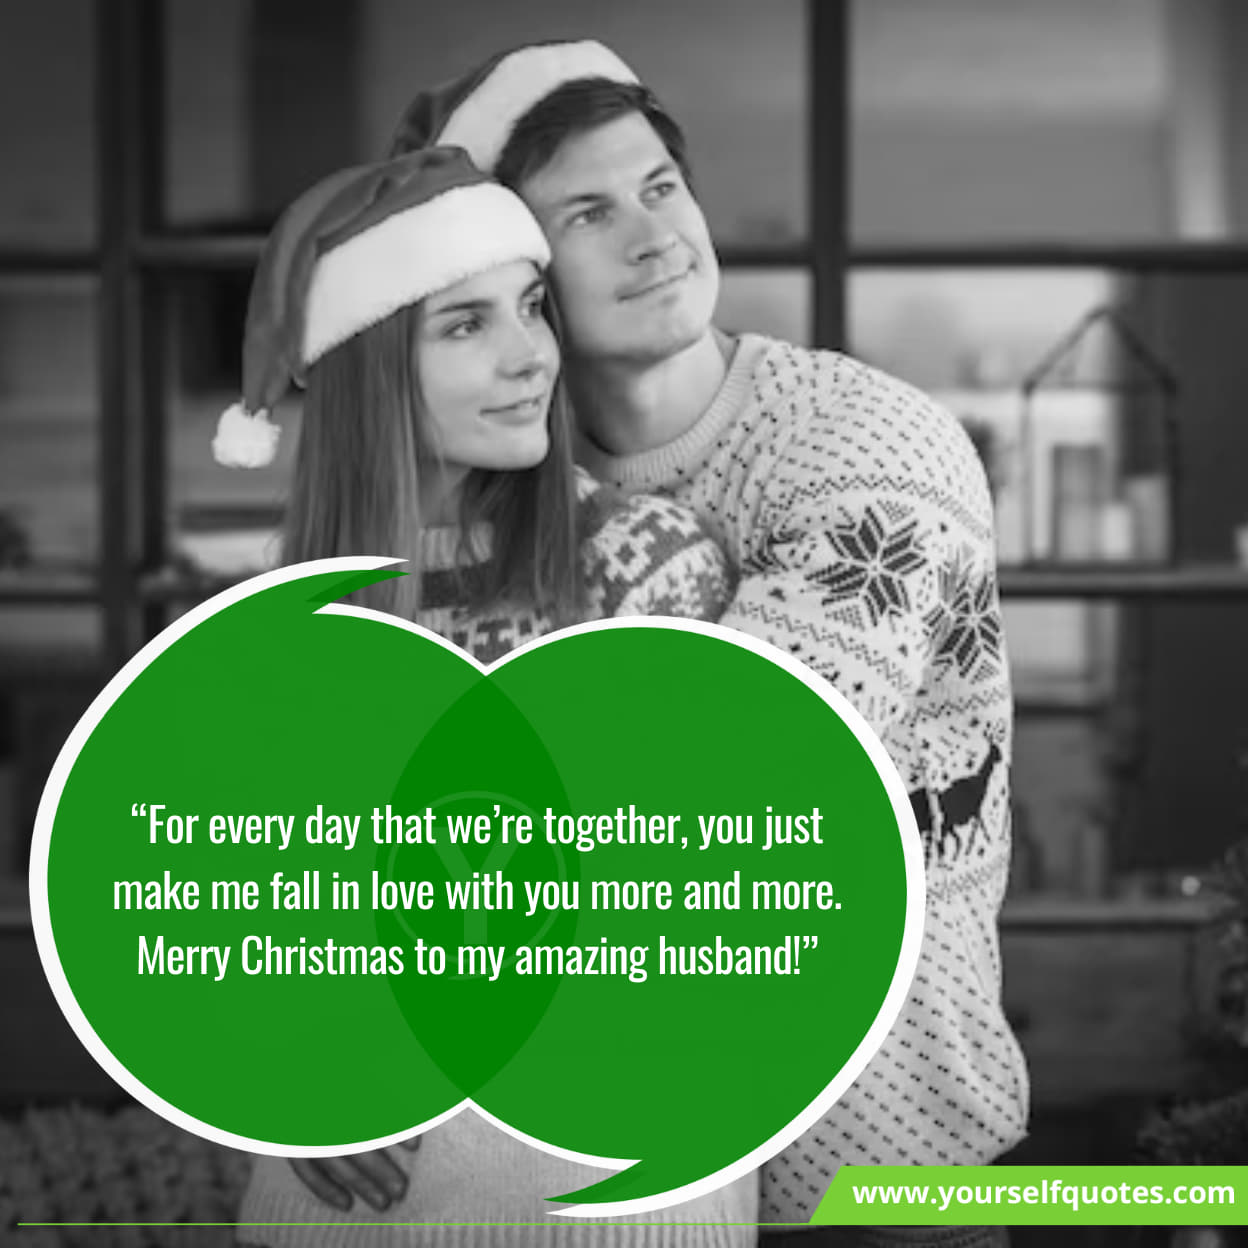 Christmas greetings for my husband with love